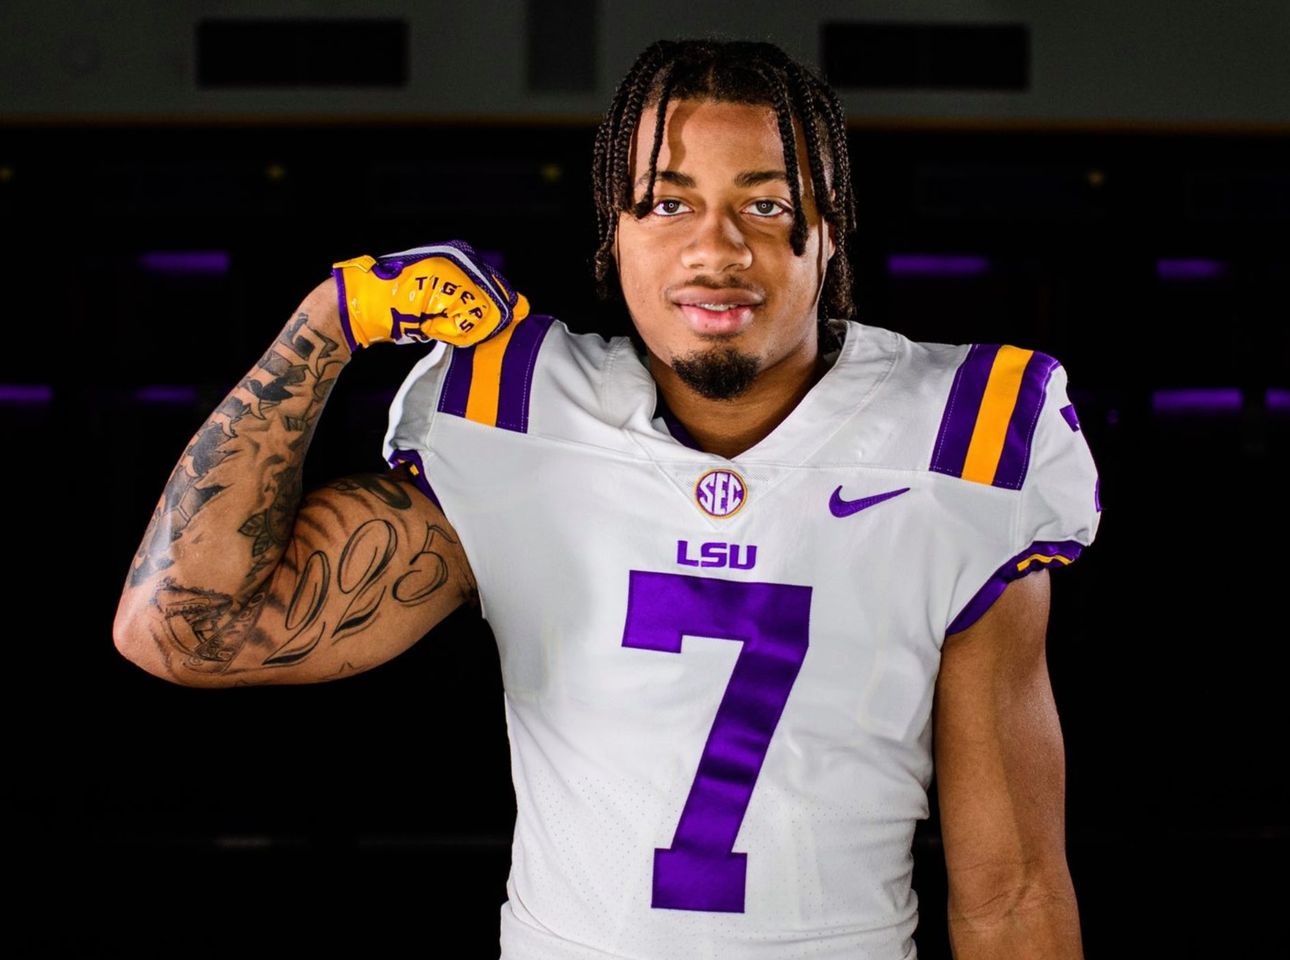 Who else would LSU's new No. 7 be but Derek Stingley Jr.?